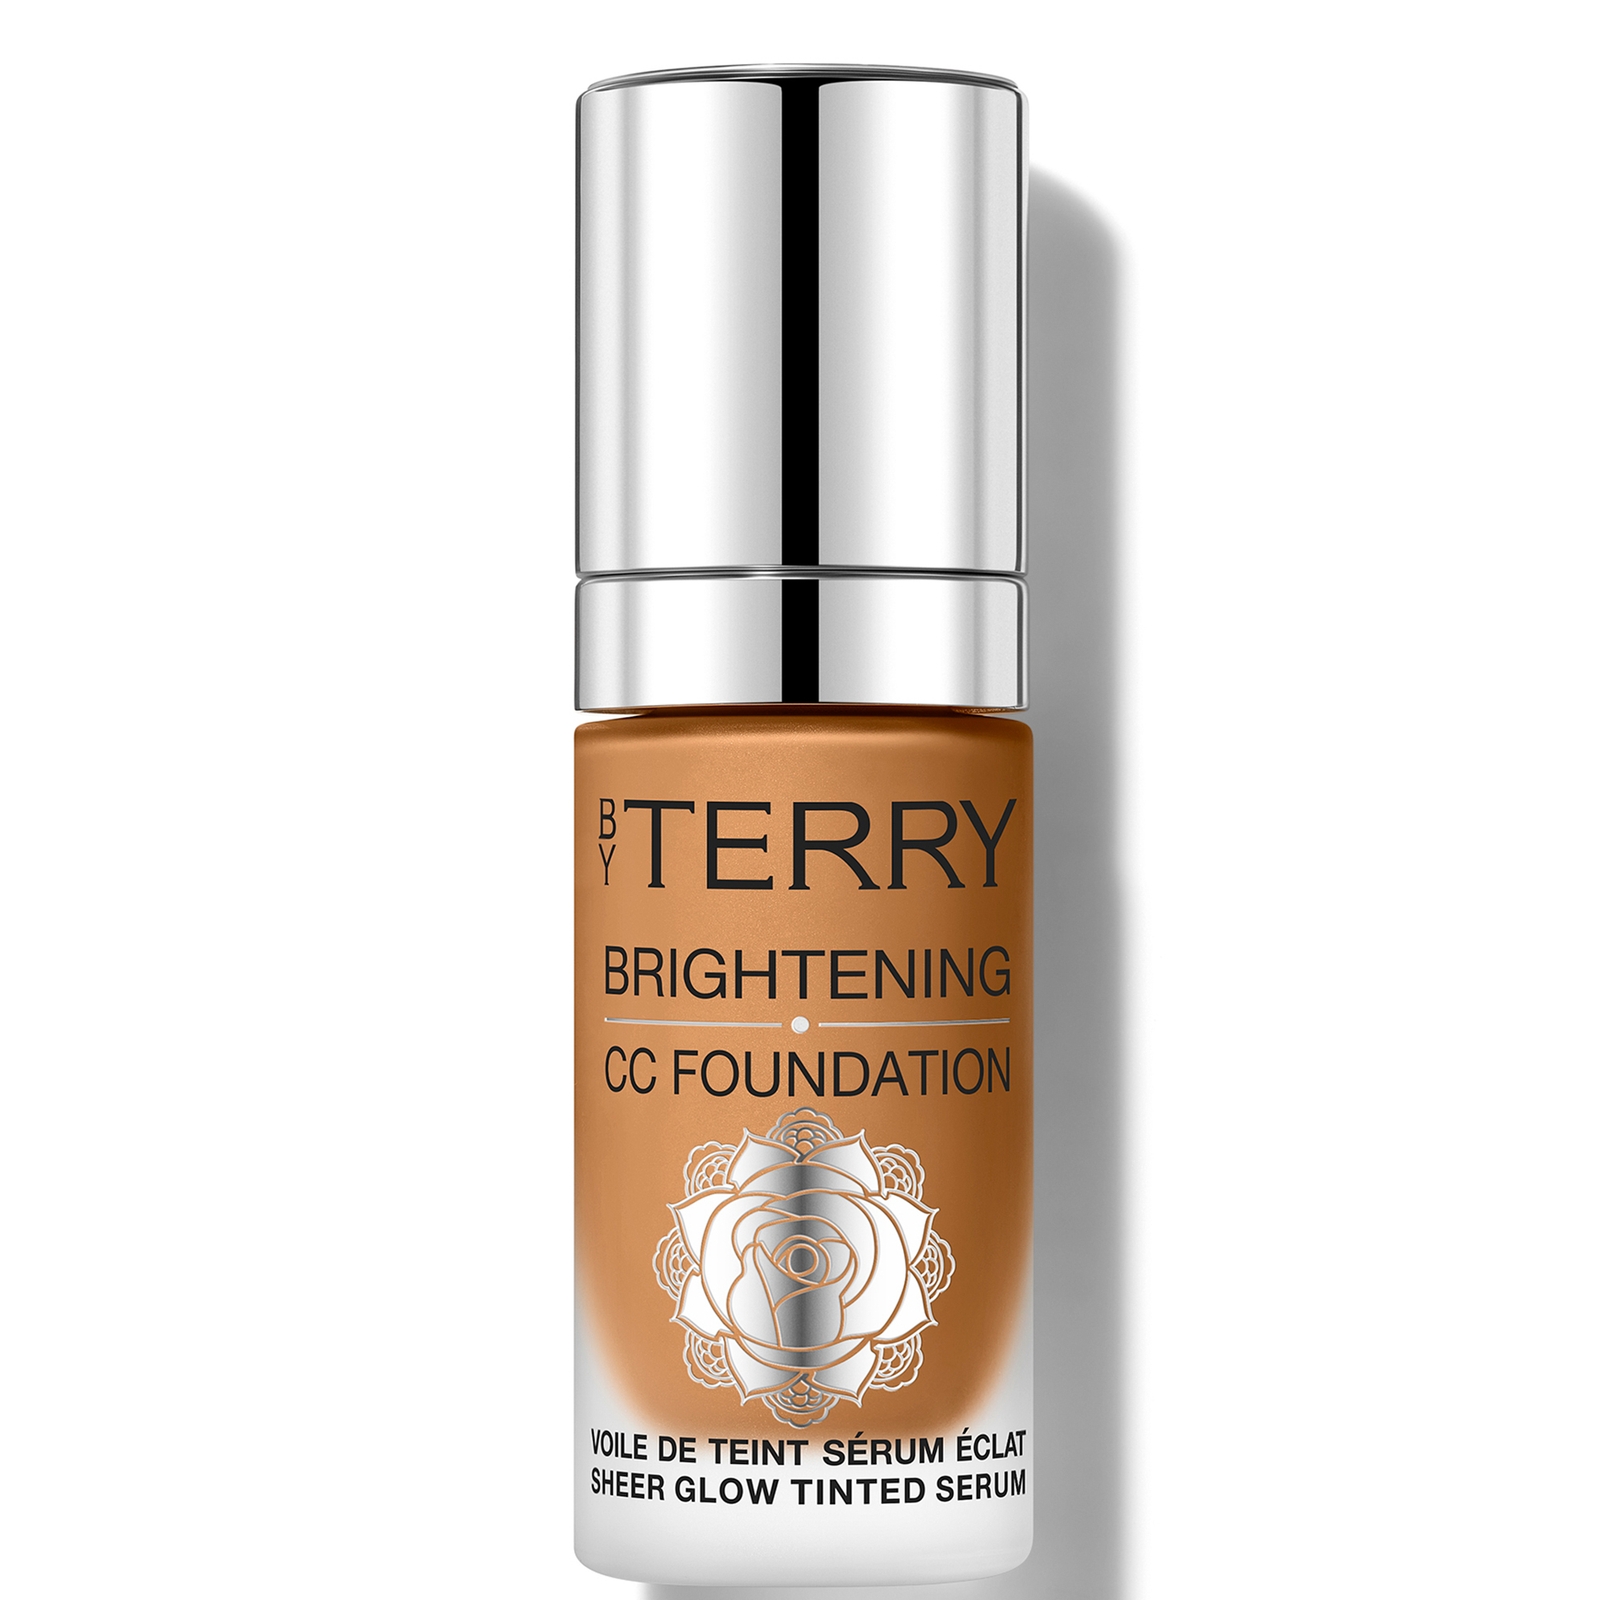 Image of By Terry Brightening CC Foundation 30ml (Various Shades) - 7N - MEDIUM DEEP NEUTRAL